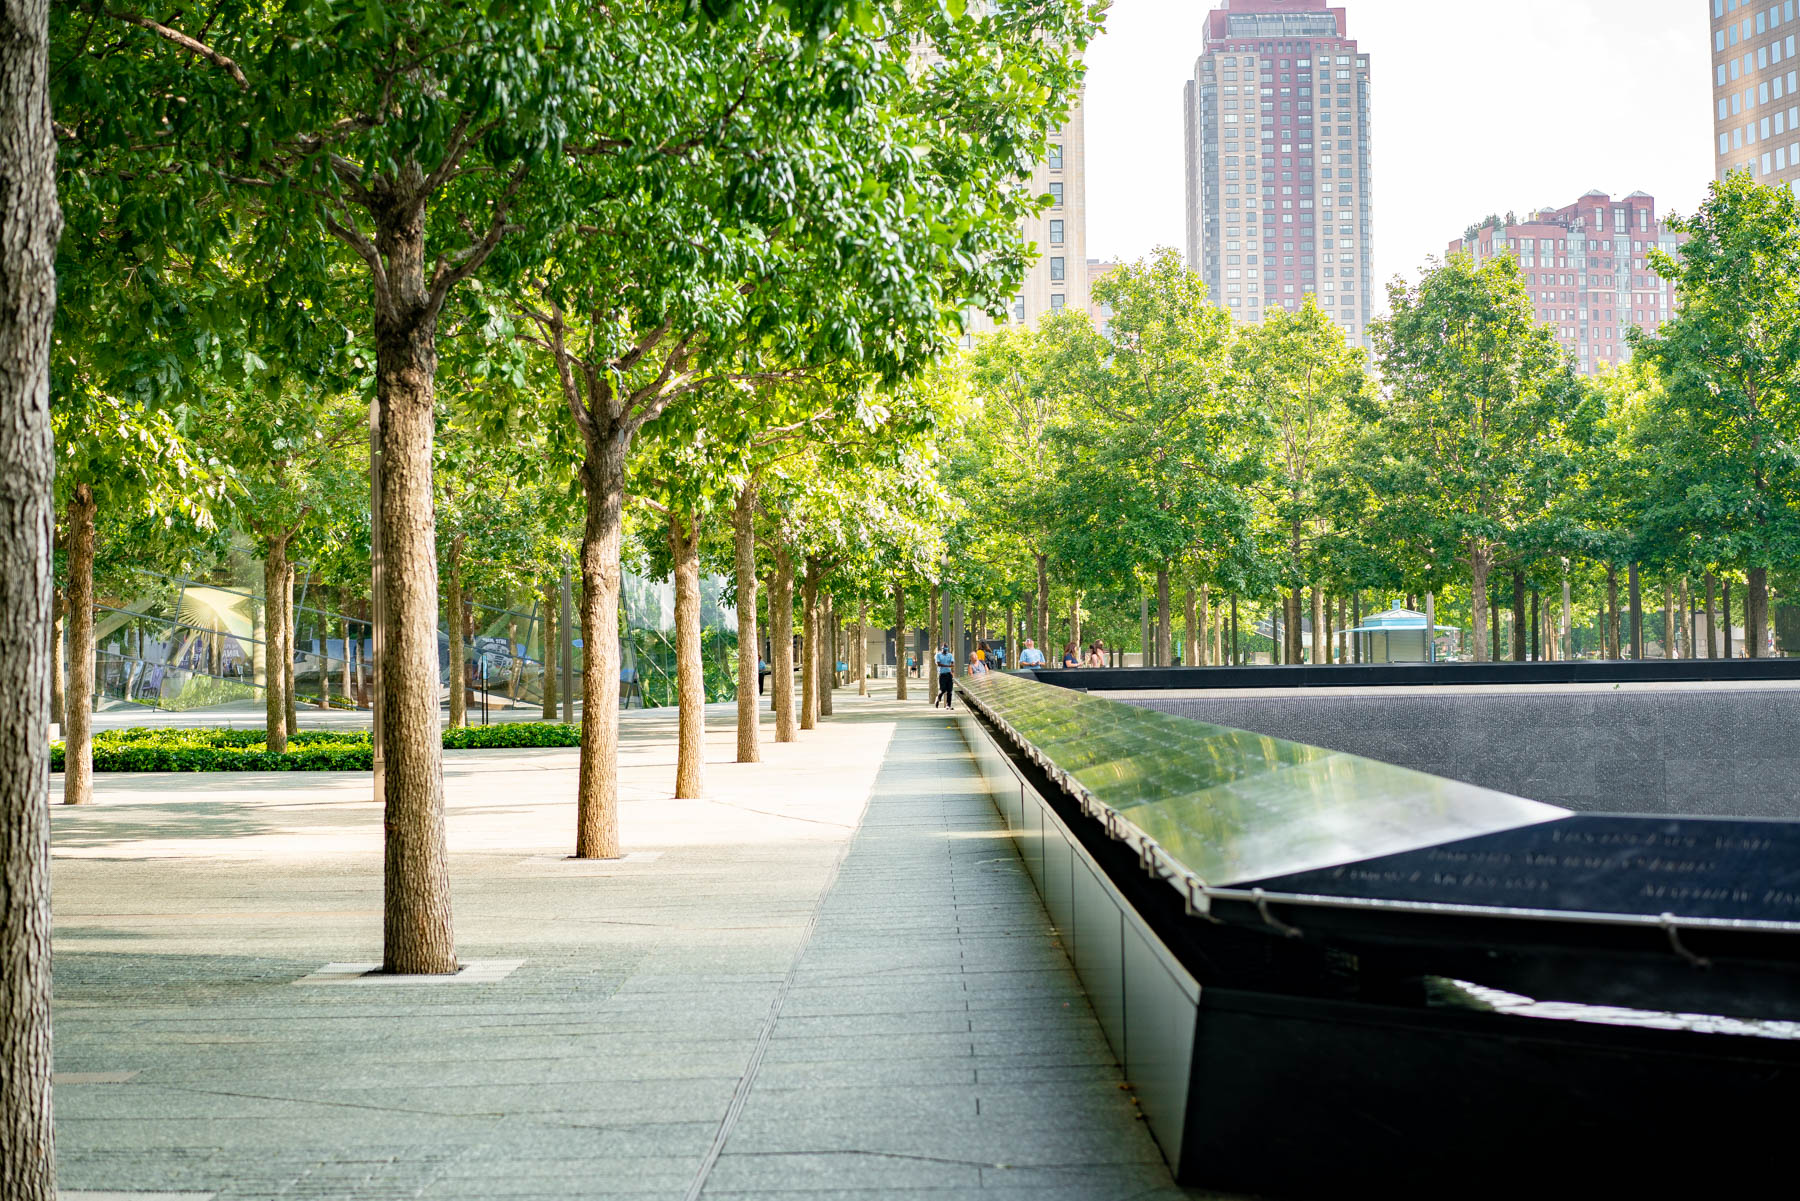 9/11 memorial nyc, historic sites in New York City